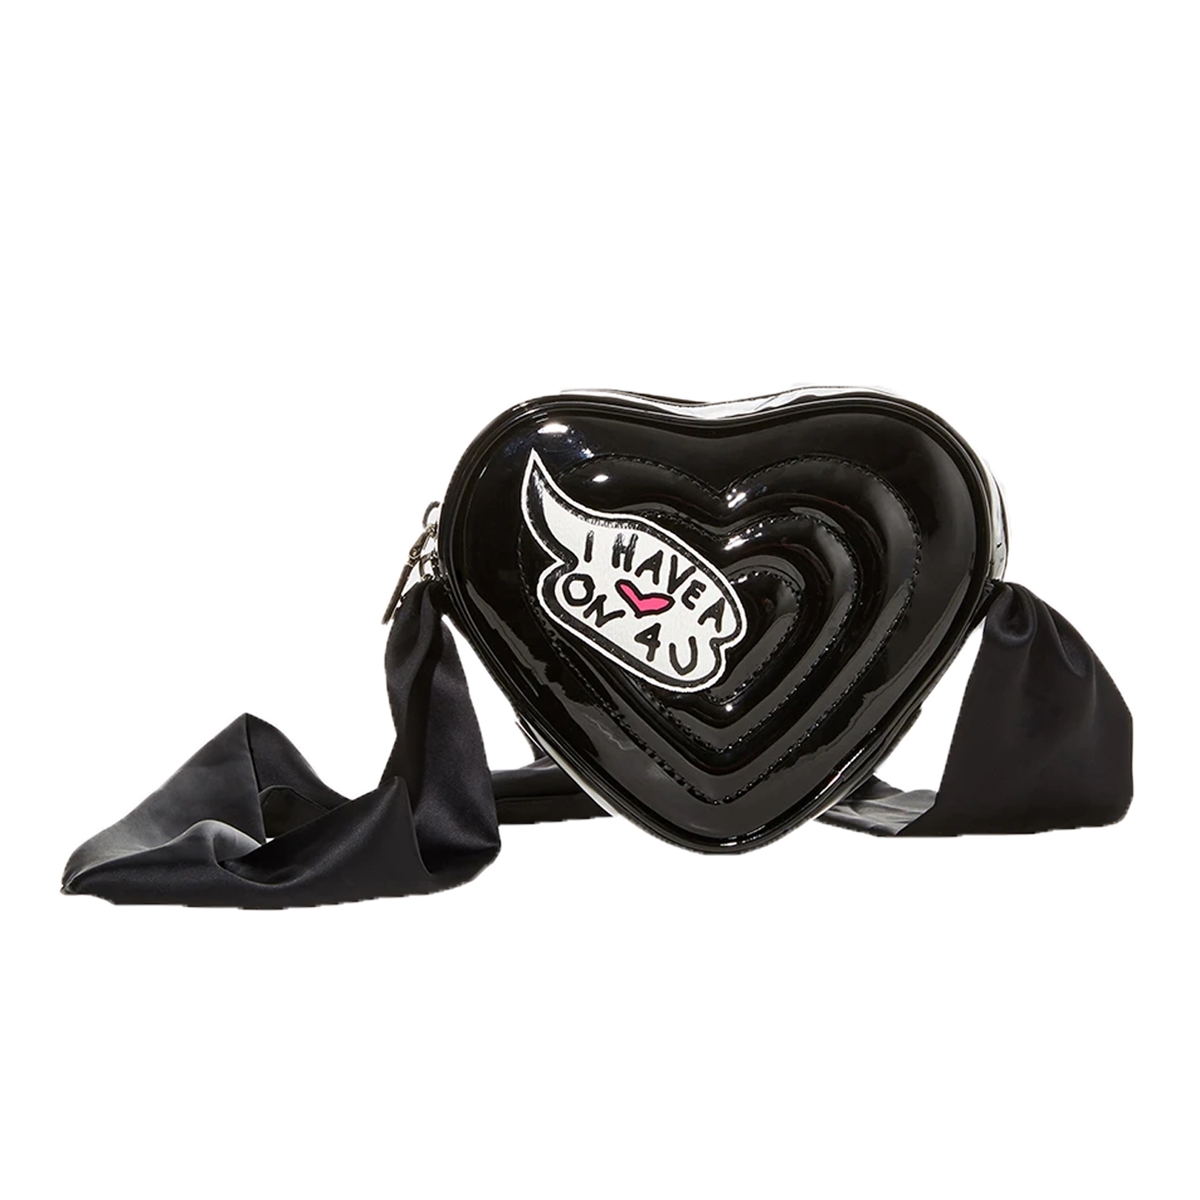 Plus Size - Betsey Johnson Black Faux Leather Studded Heart